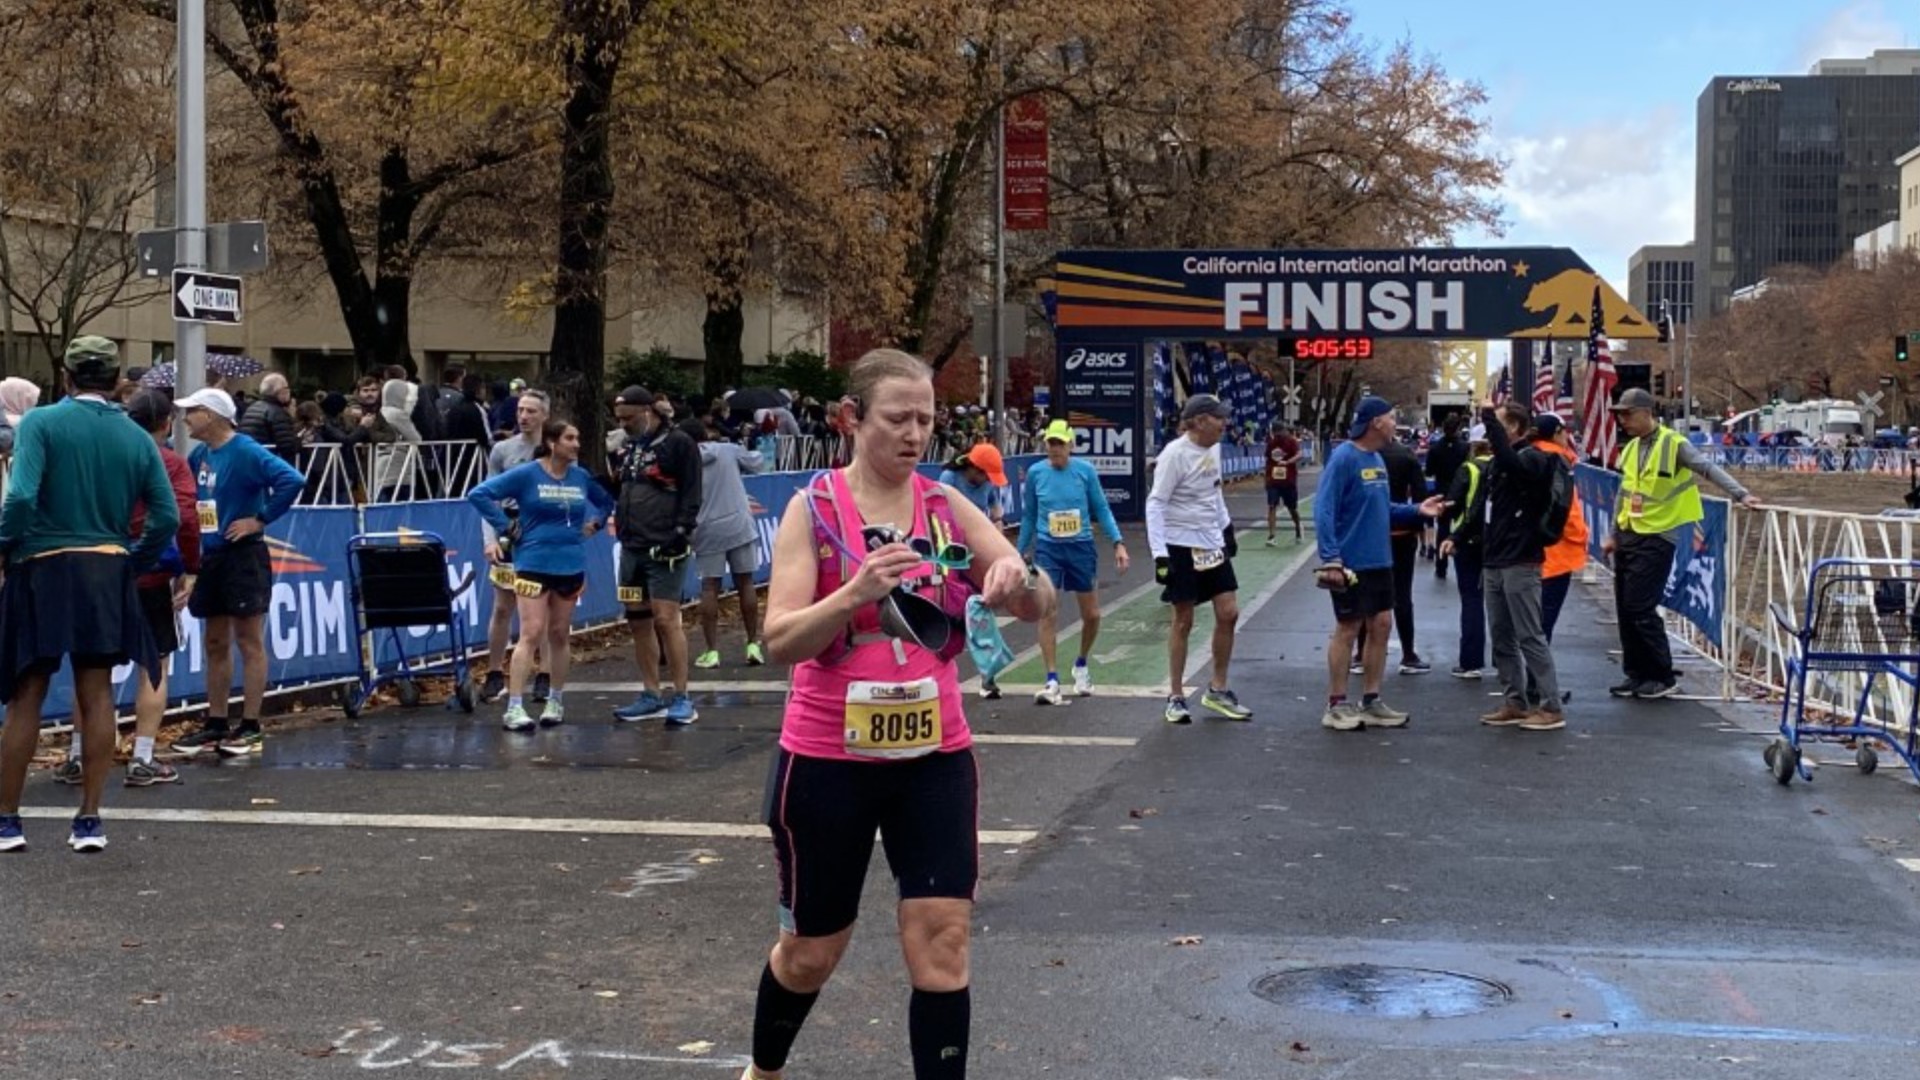 After countless hours of training, thousands of California International Marathon runners crossed the finish line on Sunday despite the rain.